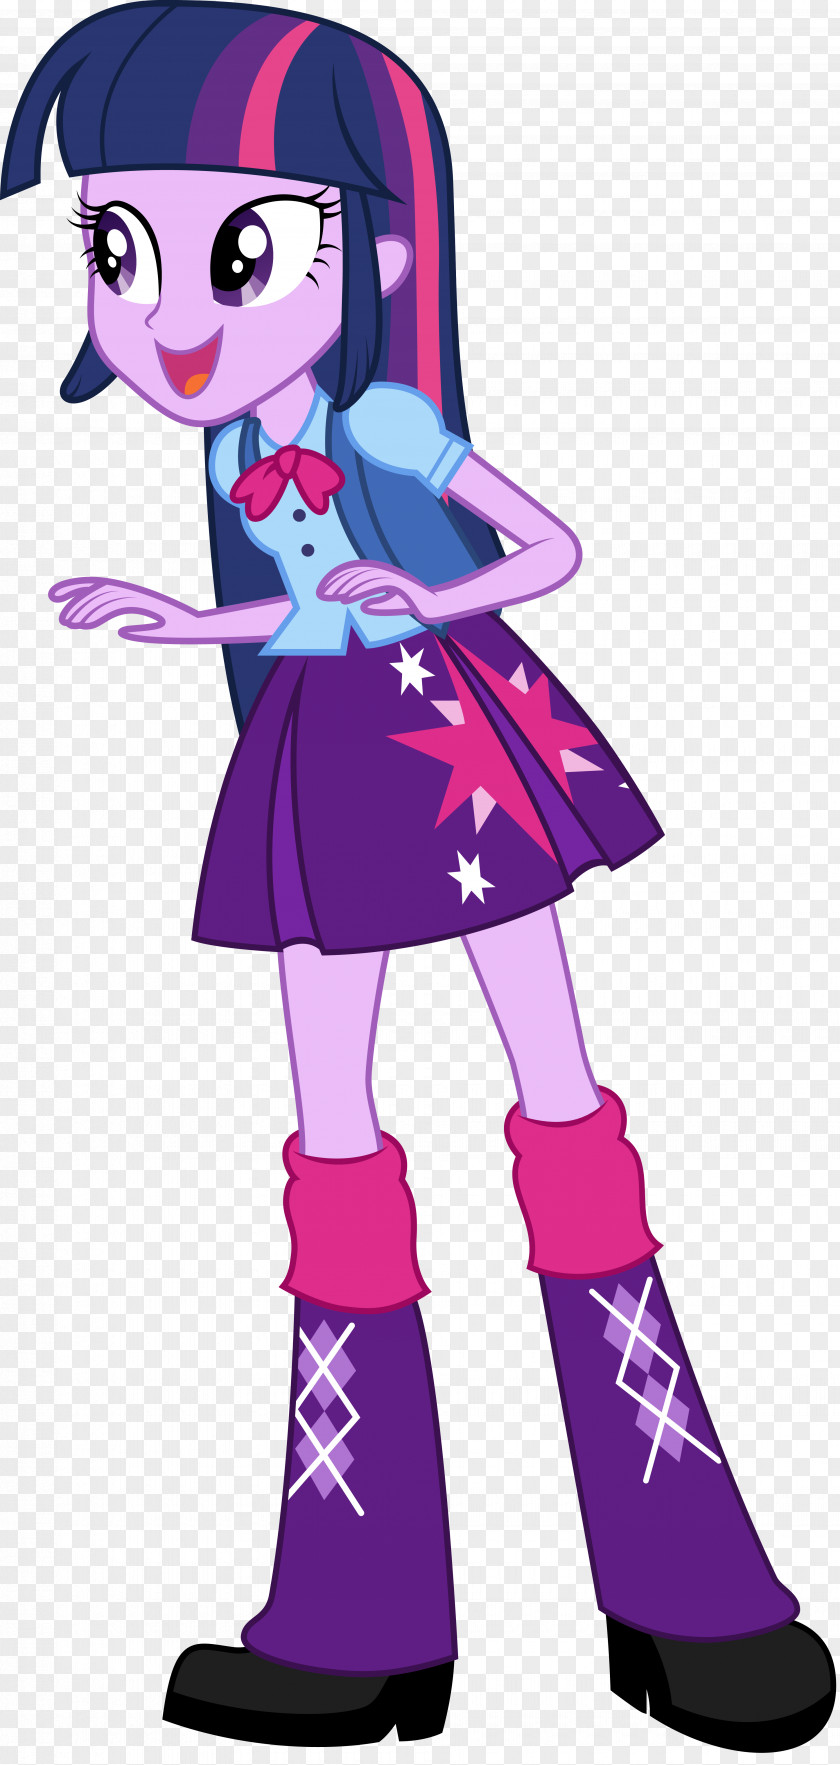 Twilight Sparkle My Little Pony: Equestria Girls PNG